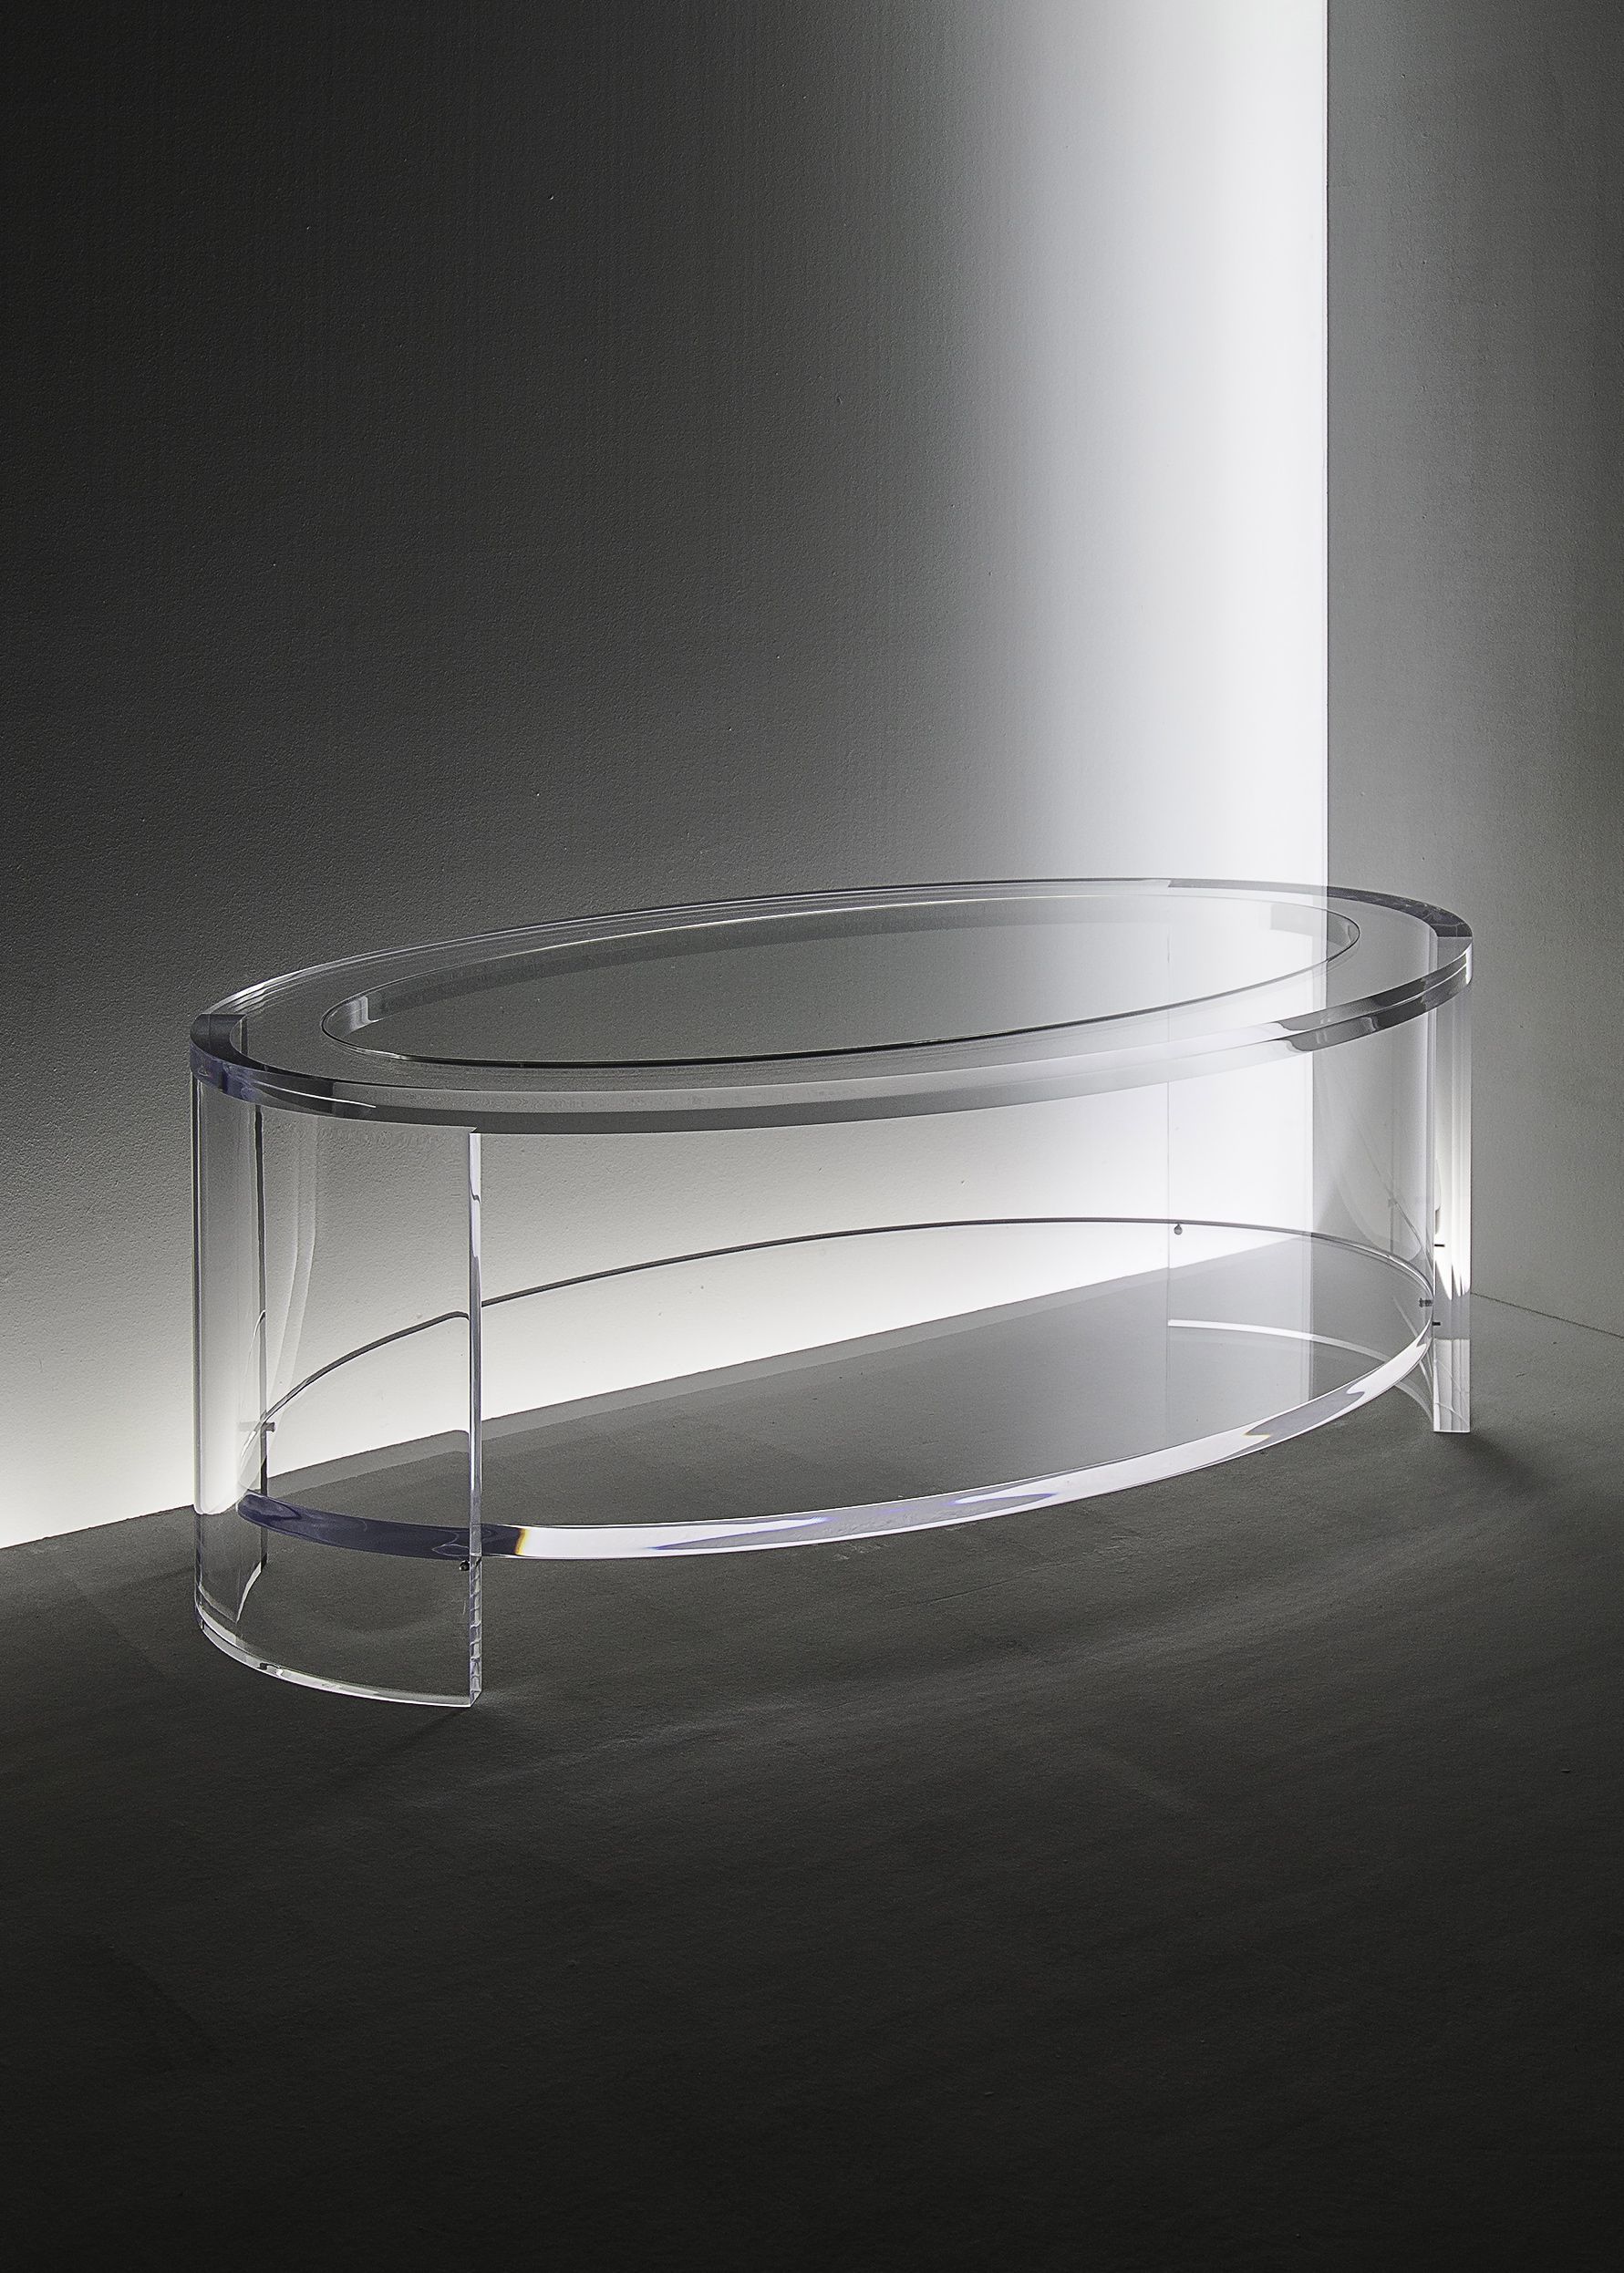 Www.studiocarew.co.uk – Eclipse Oval Coffee Table In Acrylic And Glass Inside Glass Coffee Tables With Lower Shelves (Gallery 6 of 20)